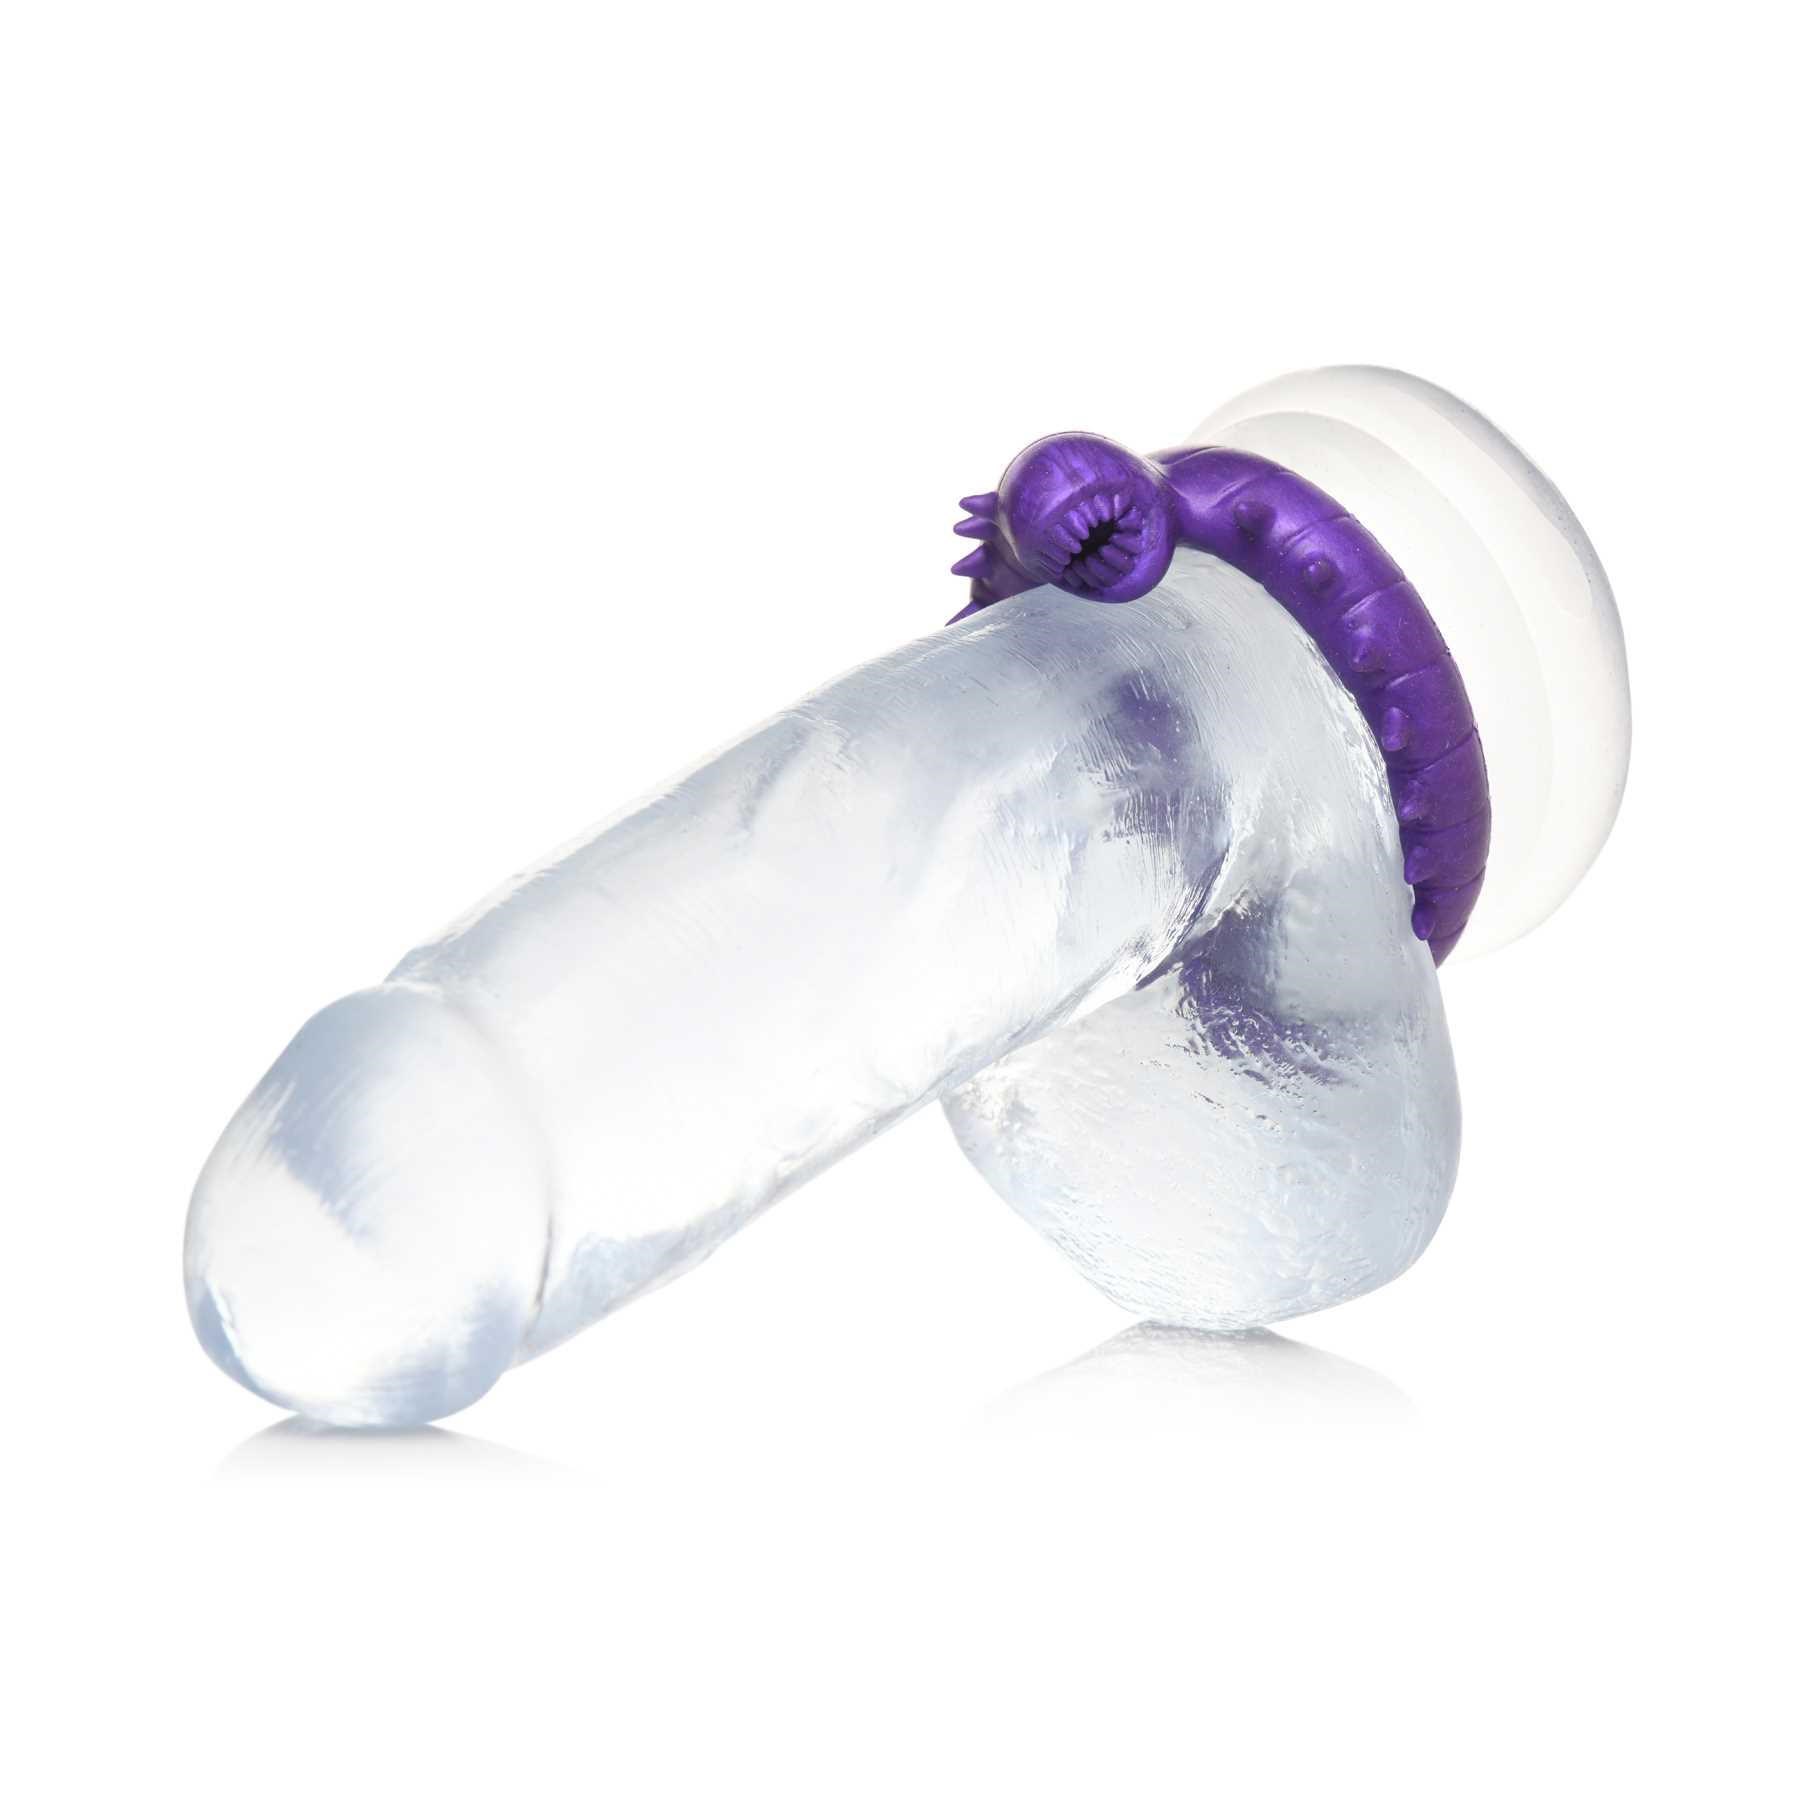 Creature Cocks Slitherine Silicone Cock Ring shown on dildo